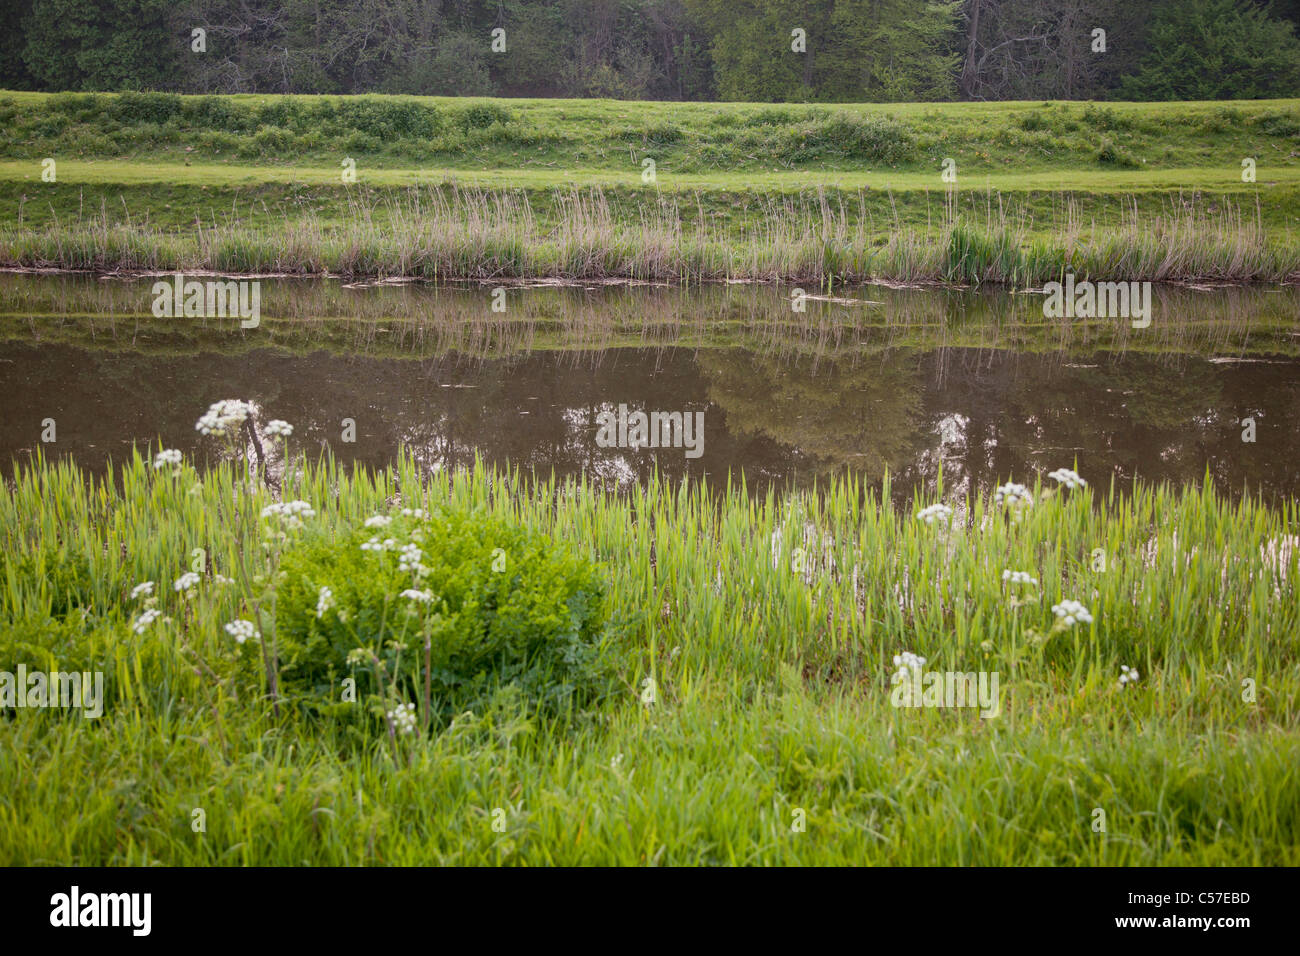 Tall grass growing on river bank Stock Photo